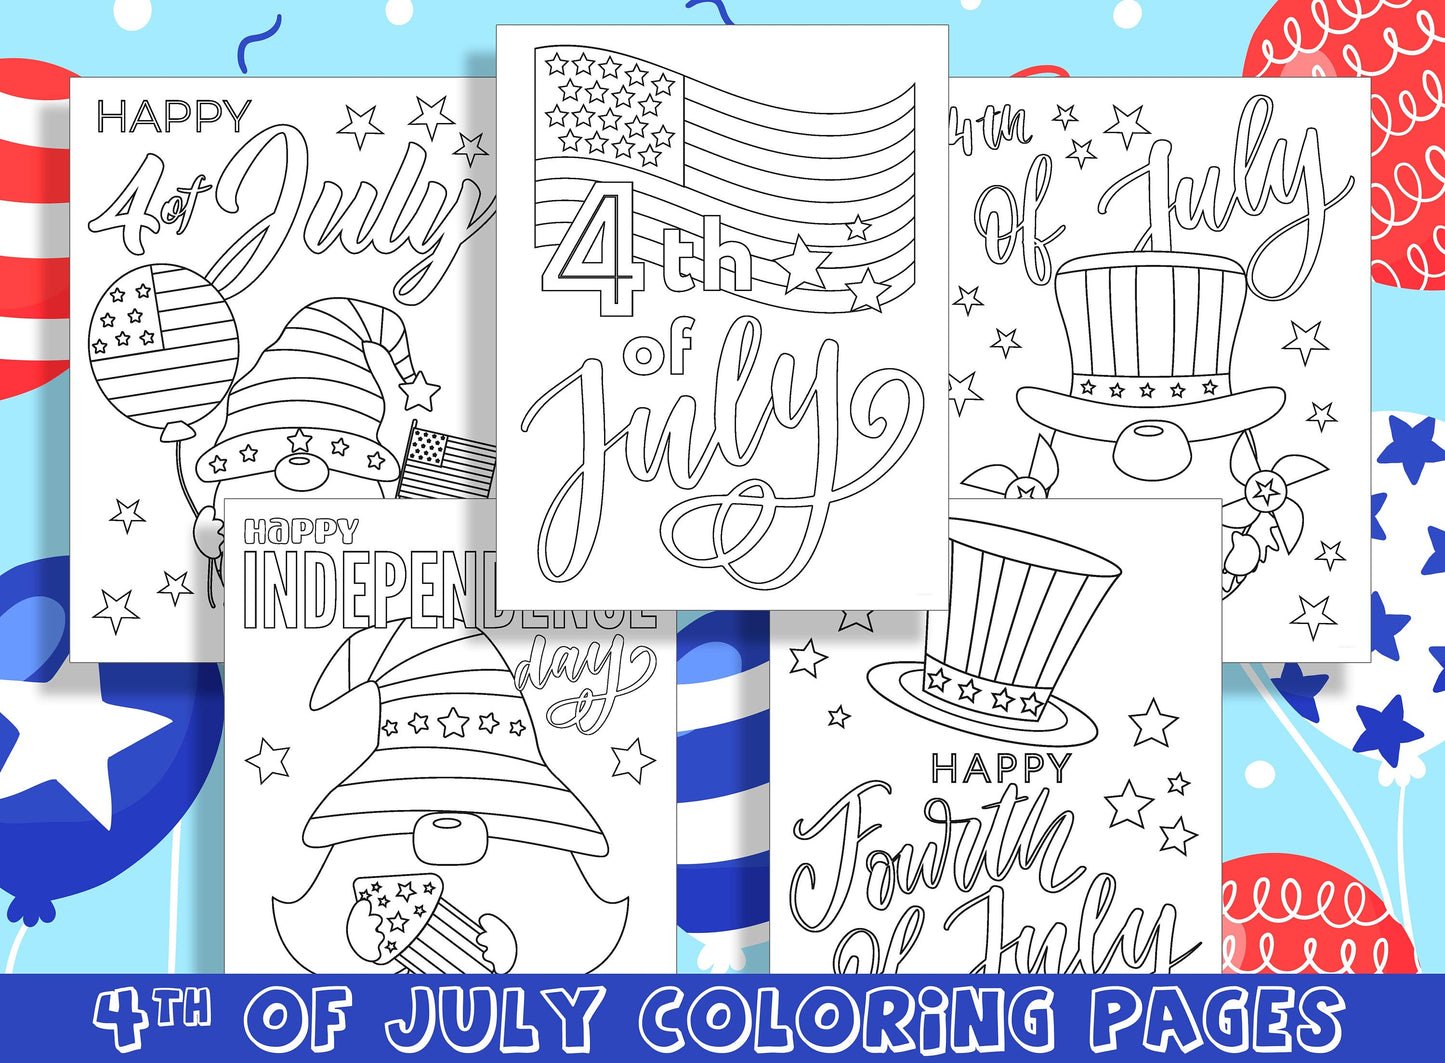 15 Patriotic Coloring Pages to Celebrate the 4th of July: Independence Day Fun for All Ages! PDF File, Instant Download